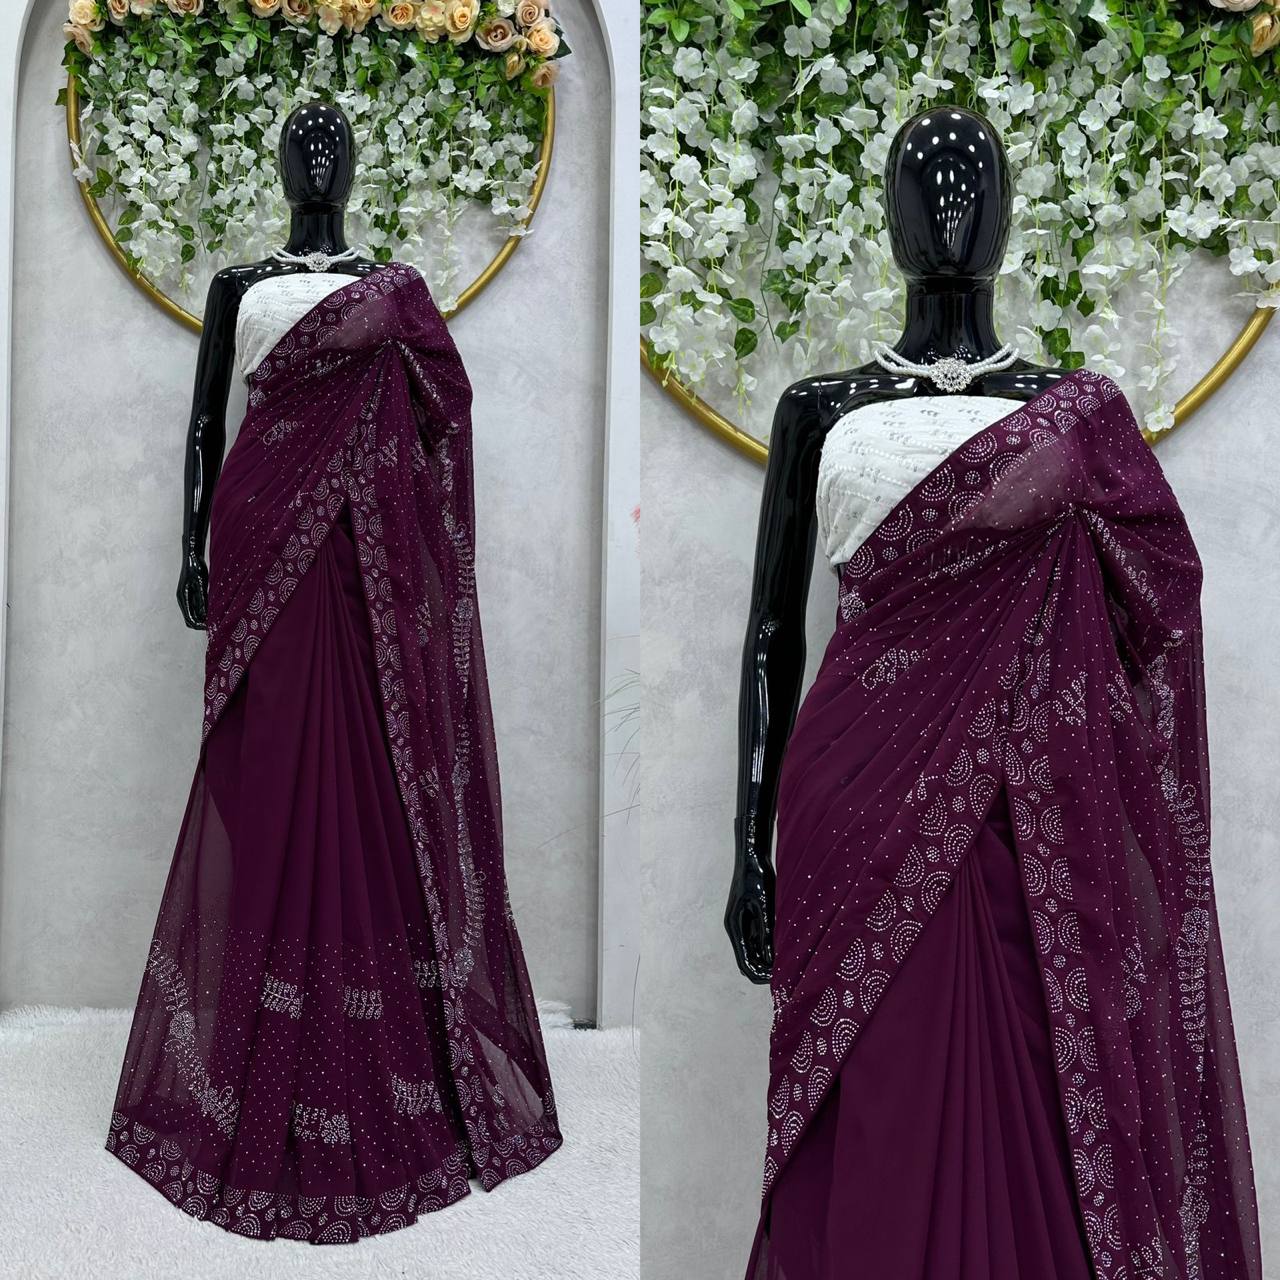 "Exquisite Faux Georgette Saree with Hot Fix Work and Thread & Sequence Blouse Ensemble"